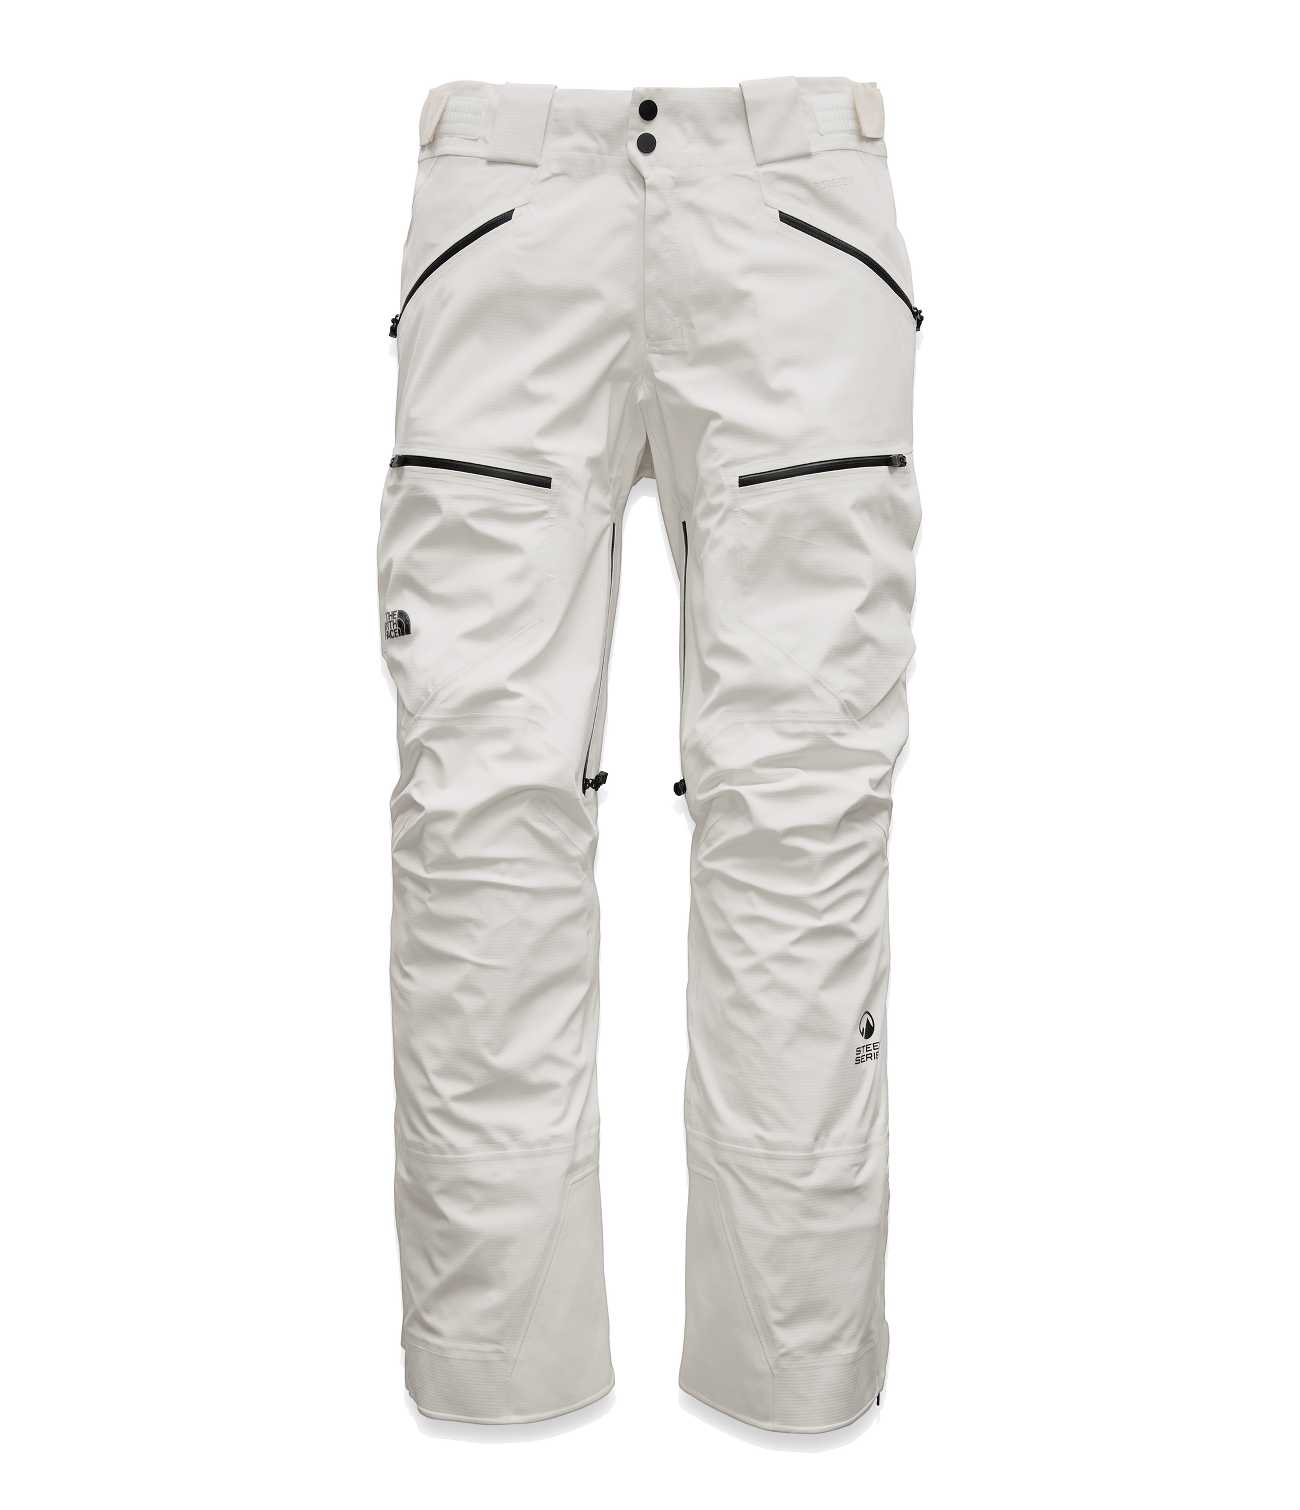 WOMEN'S PURIST PANTS, The North Face